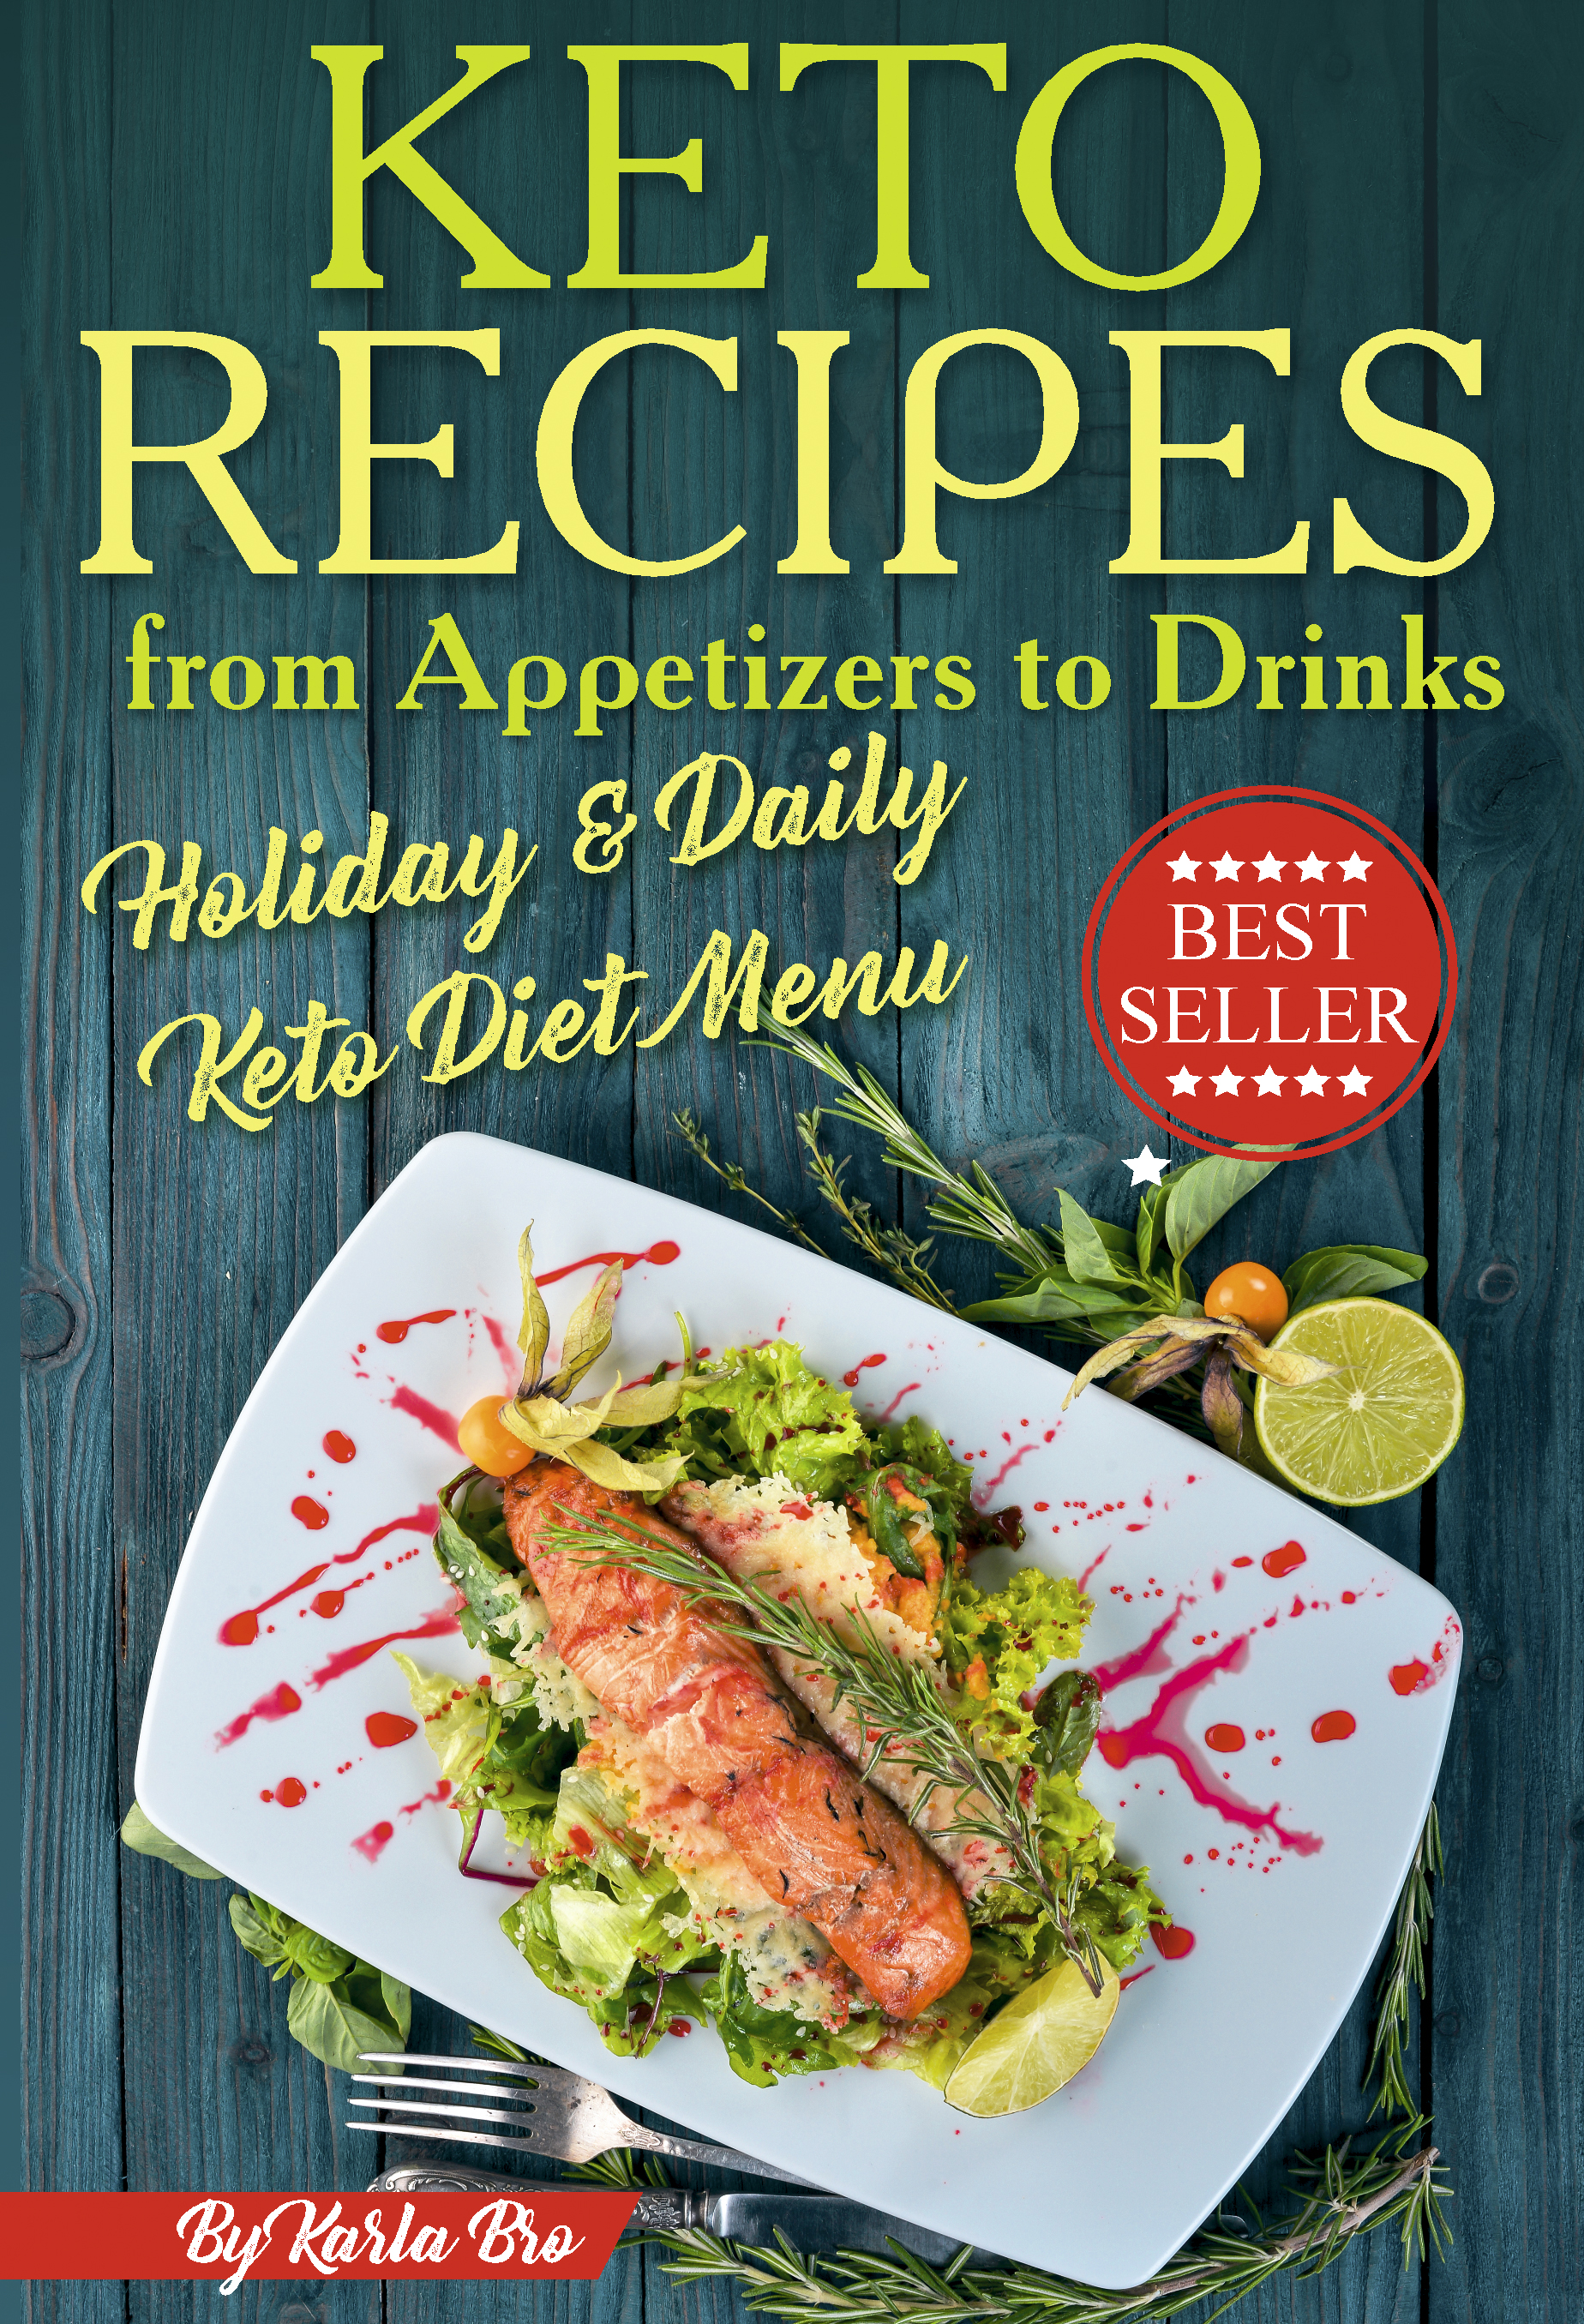 FREE: Keto Recipes from Appetizers to Drinks: Holiday and Daily Keto Diet Menu by Karla Bro